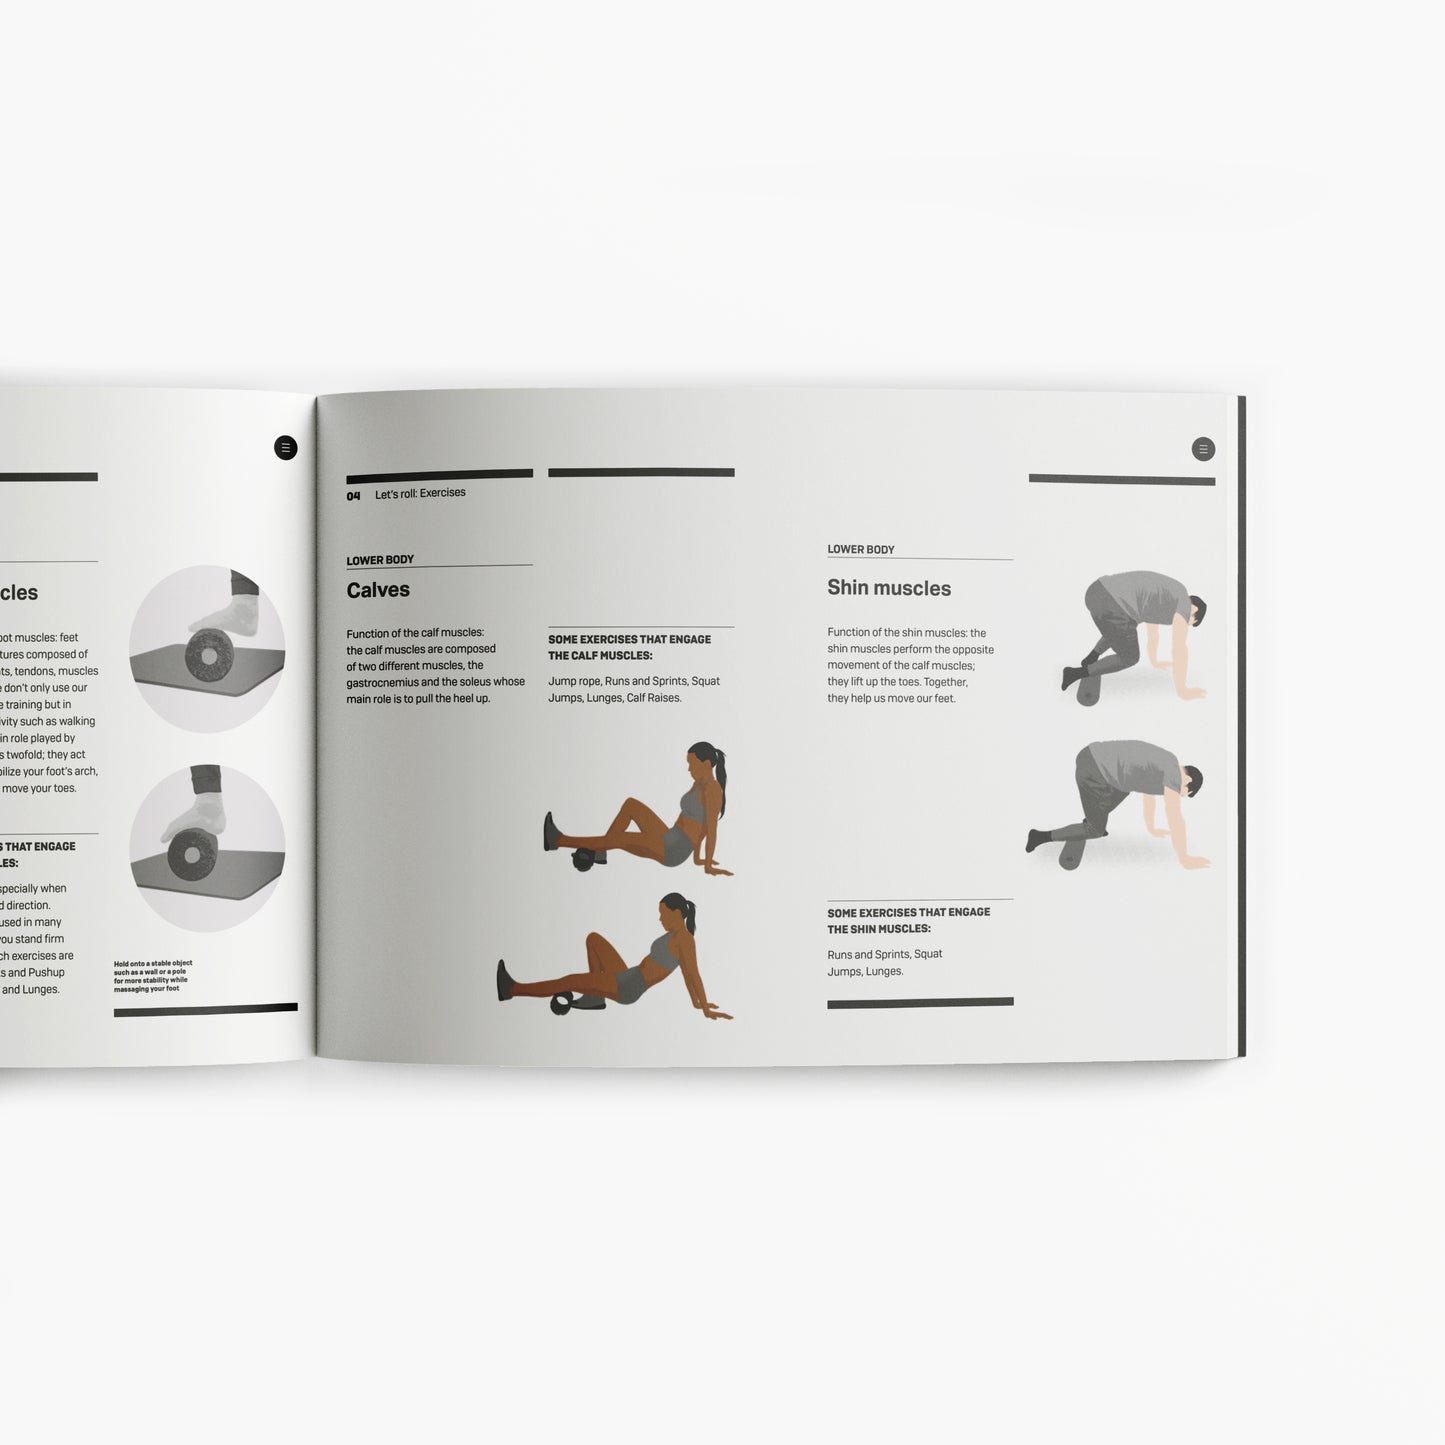 Training with foam roller - E-book